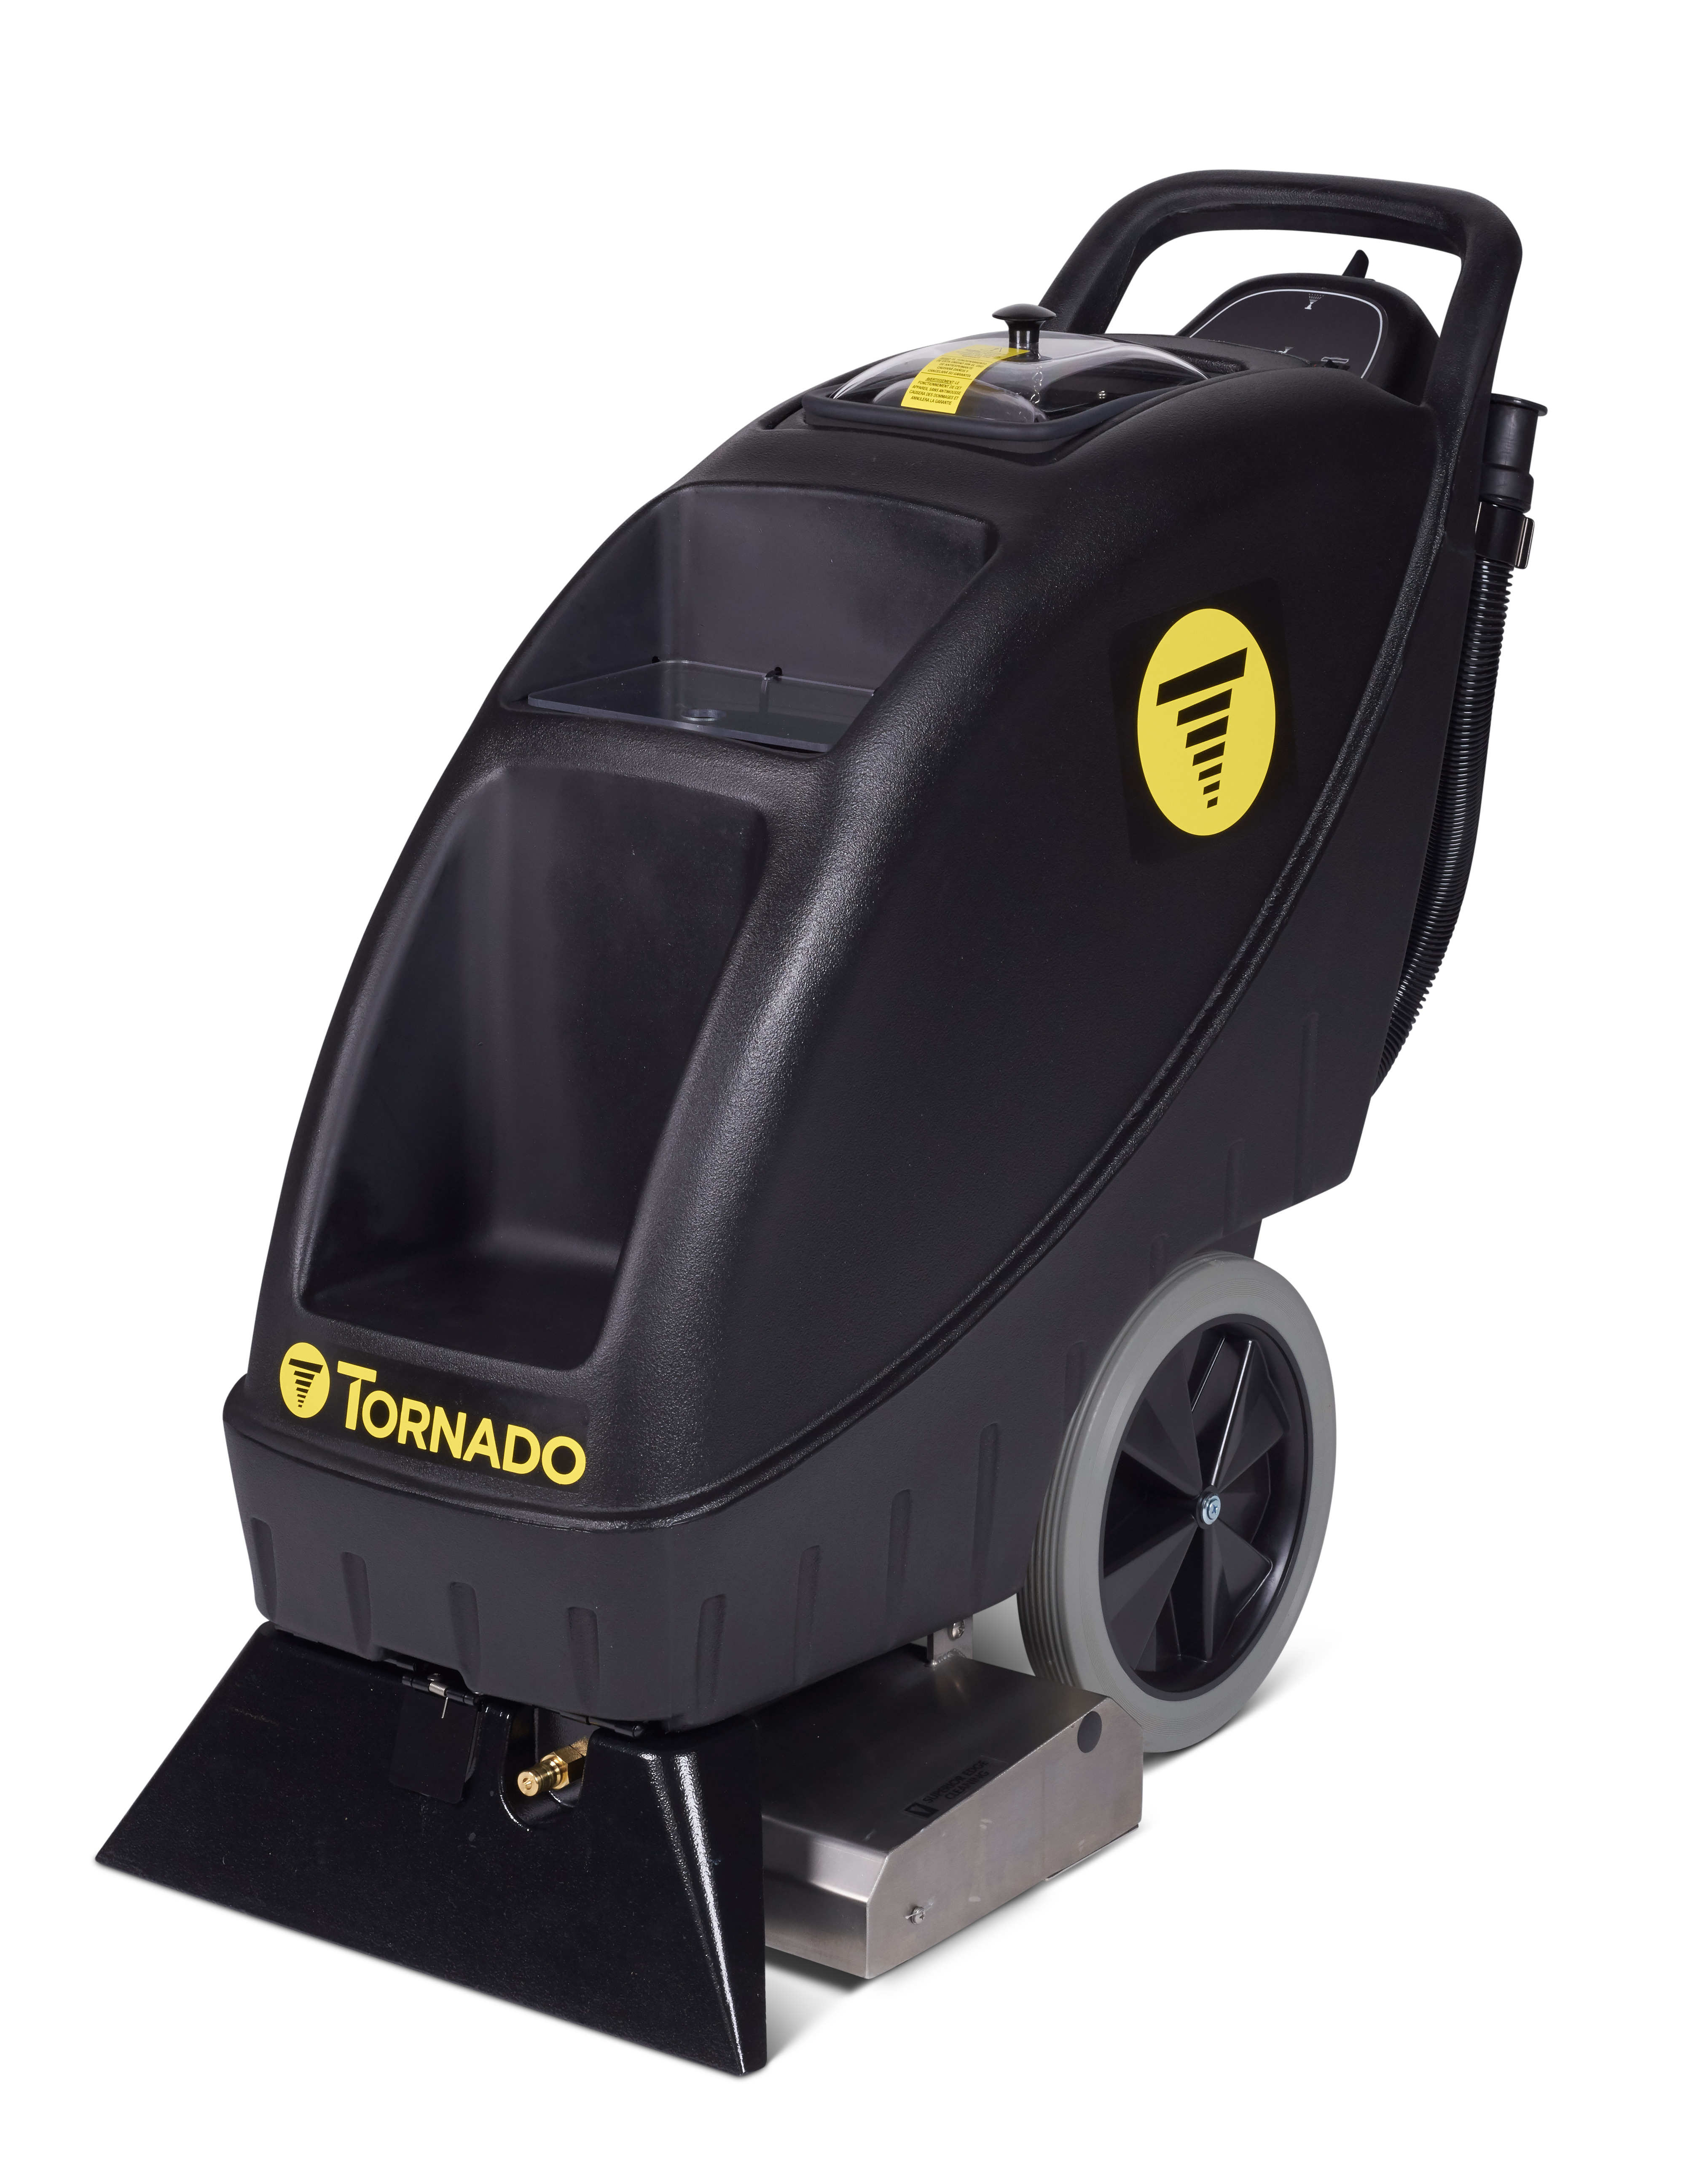 Commercial Carpet Cleaning Equipment Tornado